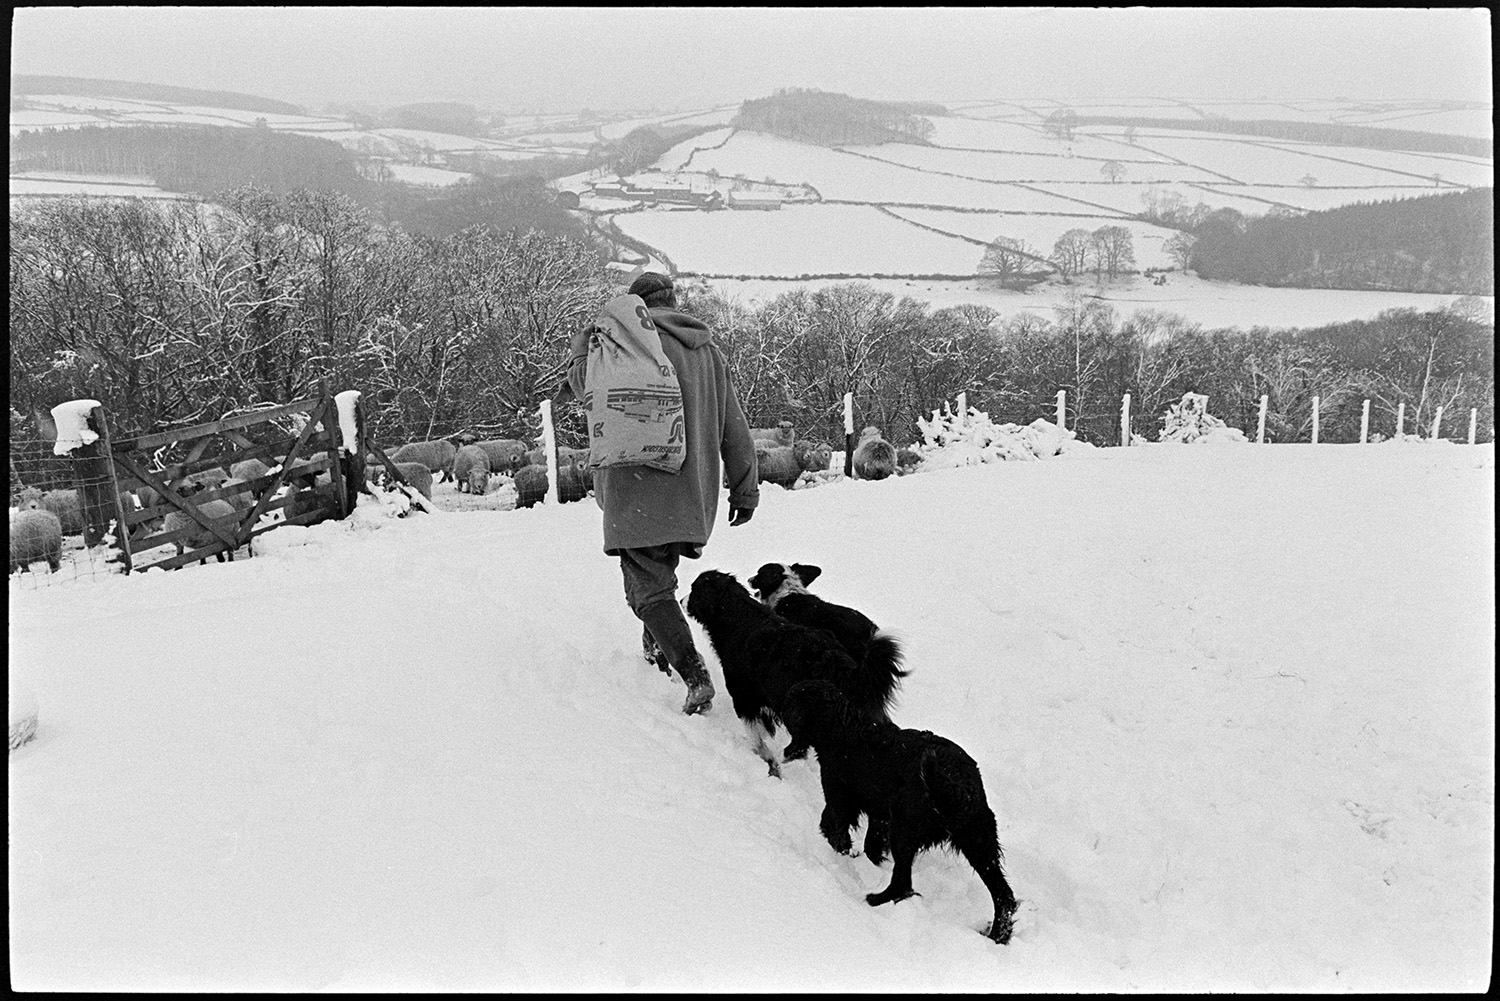 Snow, farmer taking hay to sheep, farmyard, barn with hay, counting sheep, lots of dogs. 
[George Ayre carrying a sack of feed to sheep in a snow covered field at Ashwell, Dolton. He is accompanied by three dogs. A landscape of fields, trees and hedgerows covered with snow can be seen in the background.]